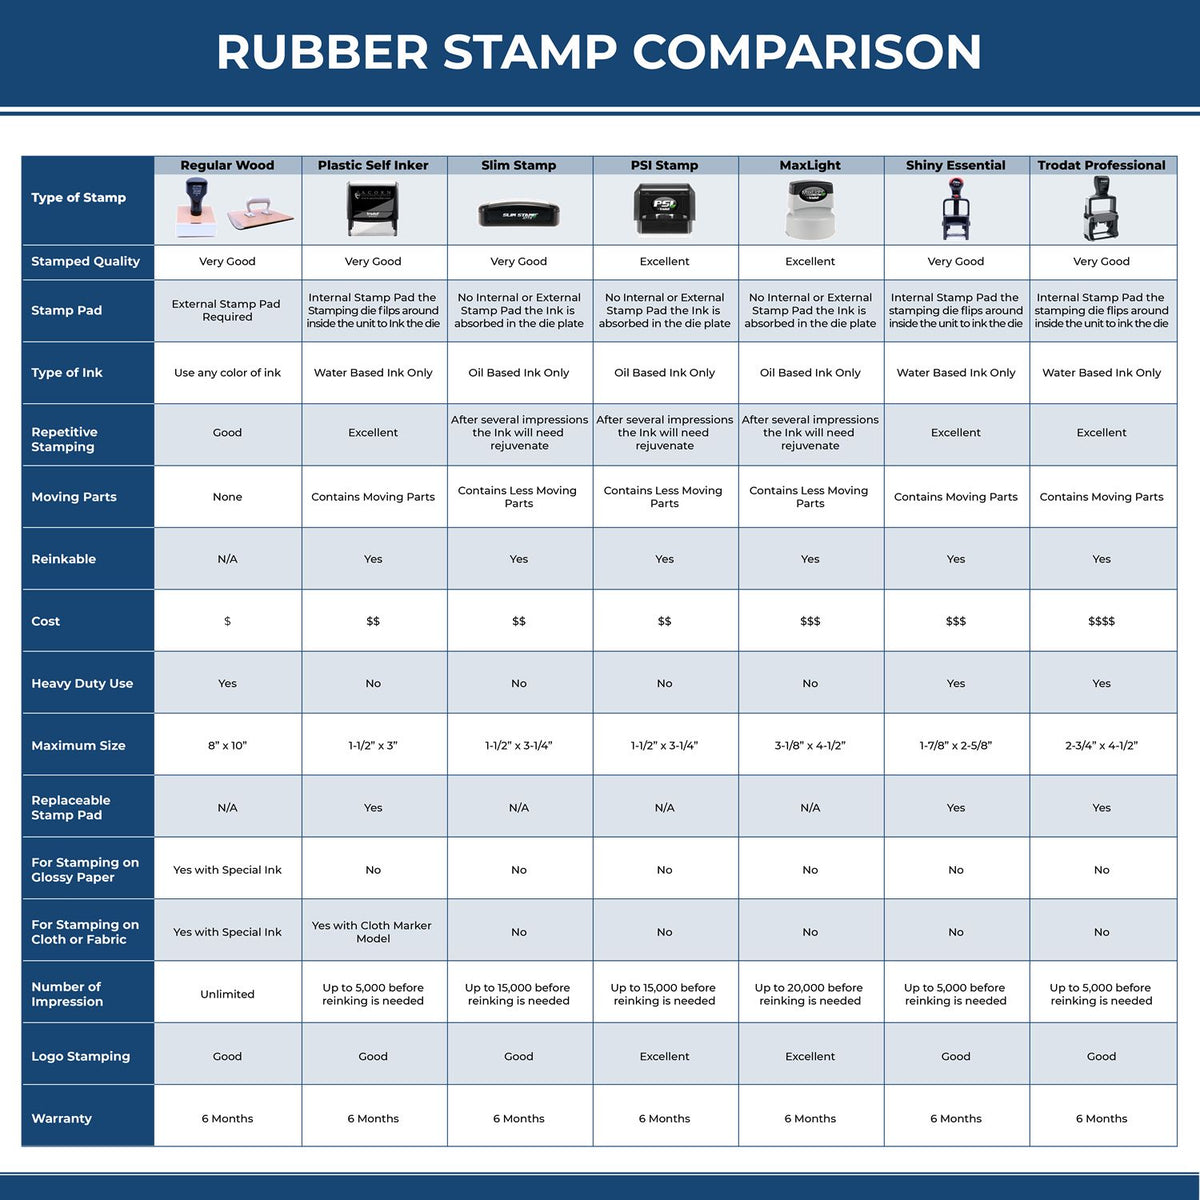 A comparison chart for the different types of mount models available for the Super Slim Delaware Notary Public Stamp.